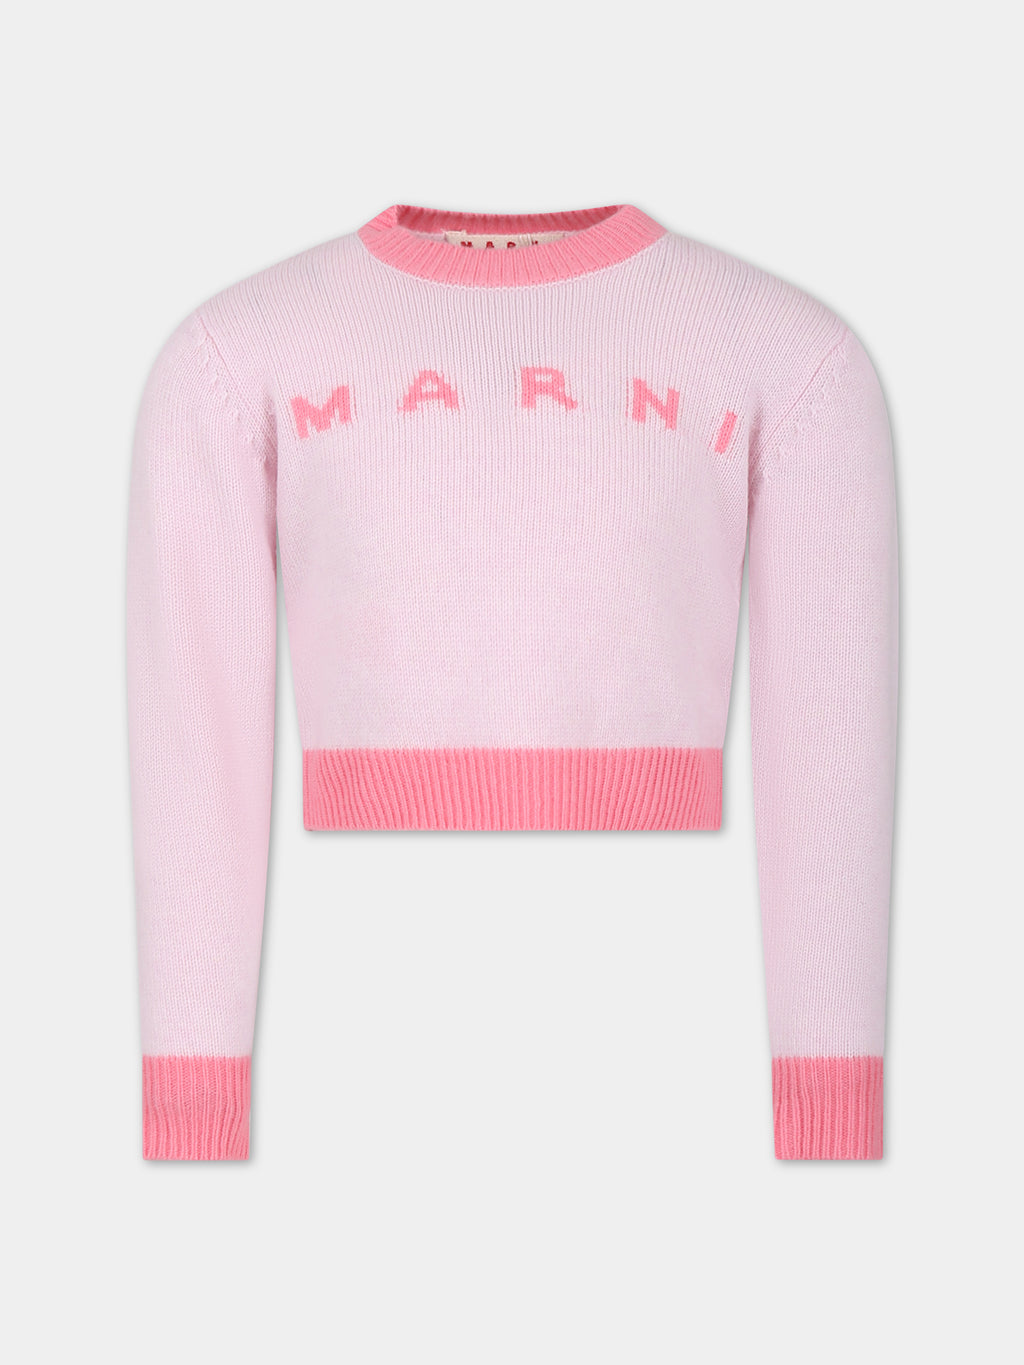 Pink sweater for girl with logo